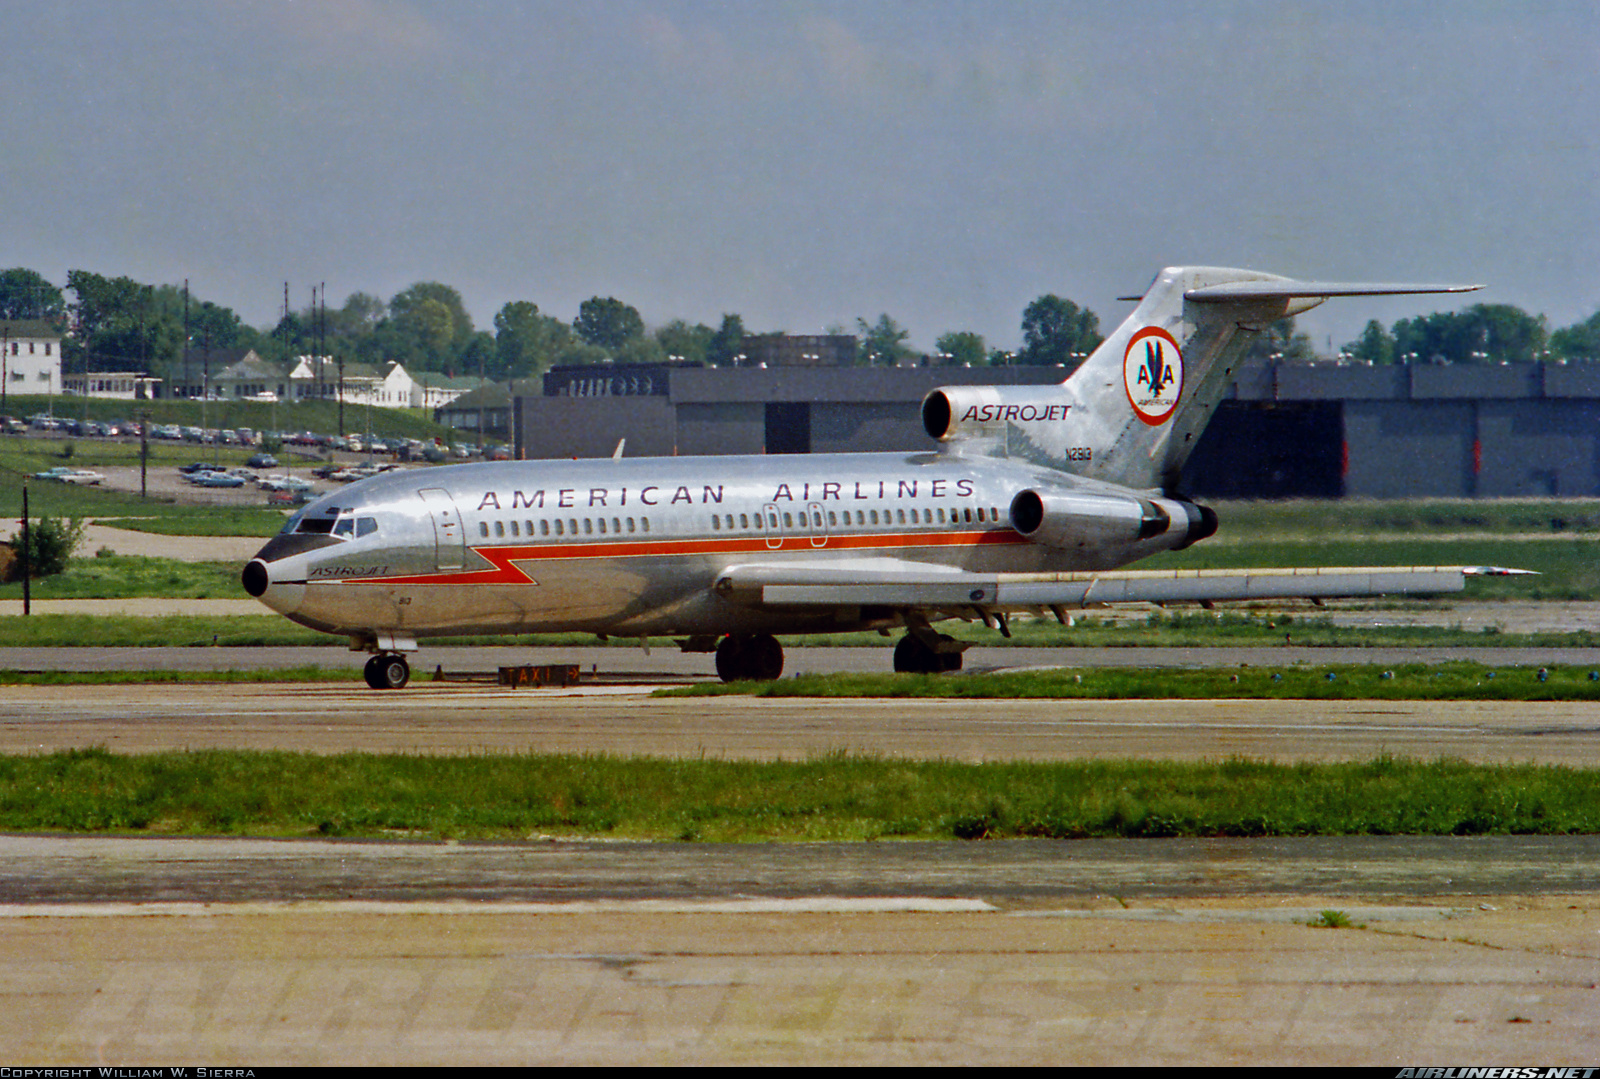 boeing-727-23-american-airlines-aviation-photo-0150223-airliners